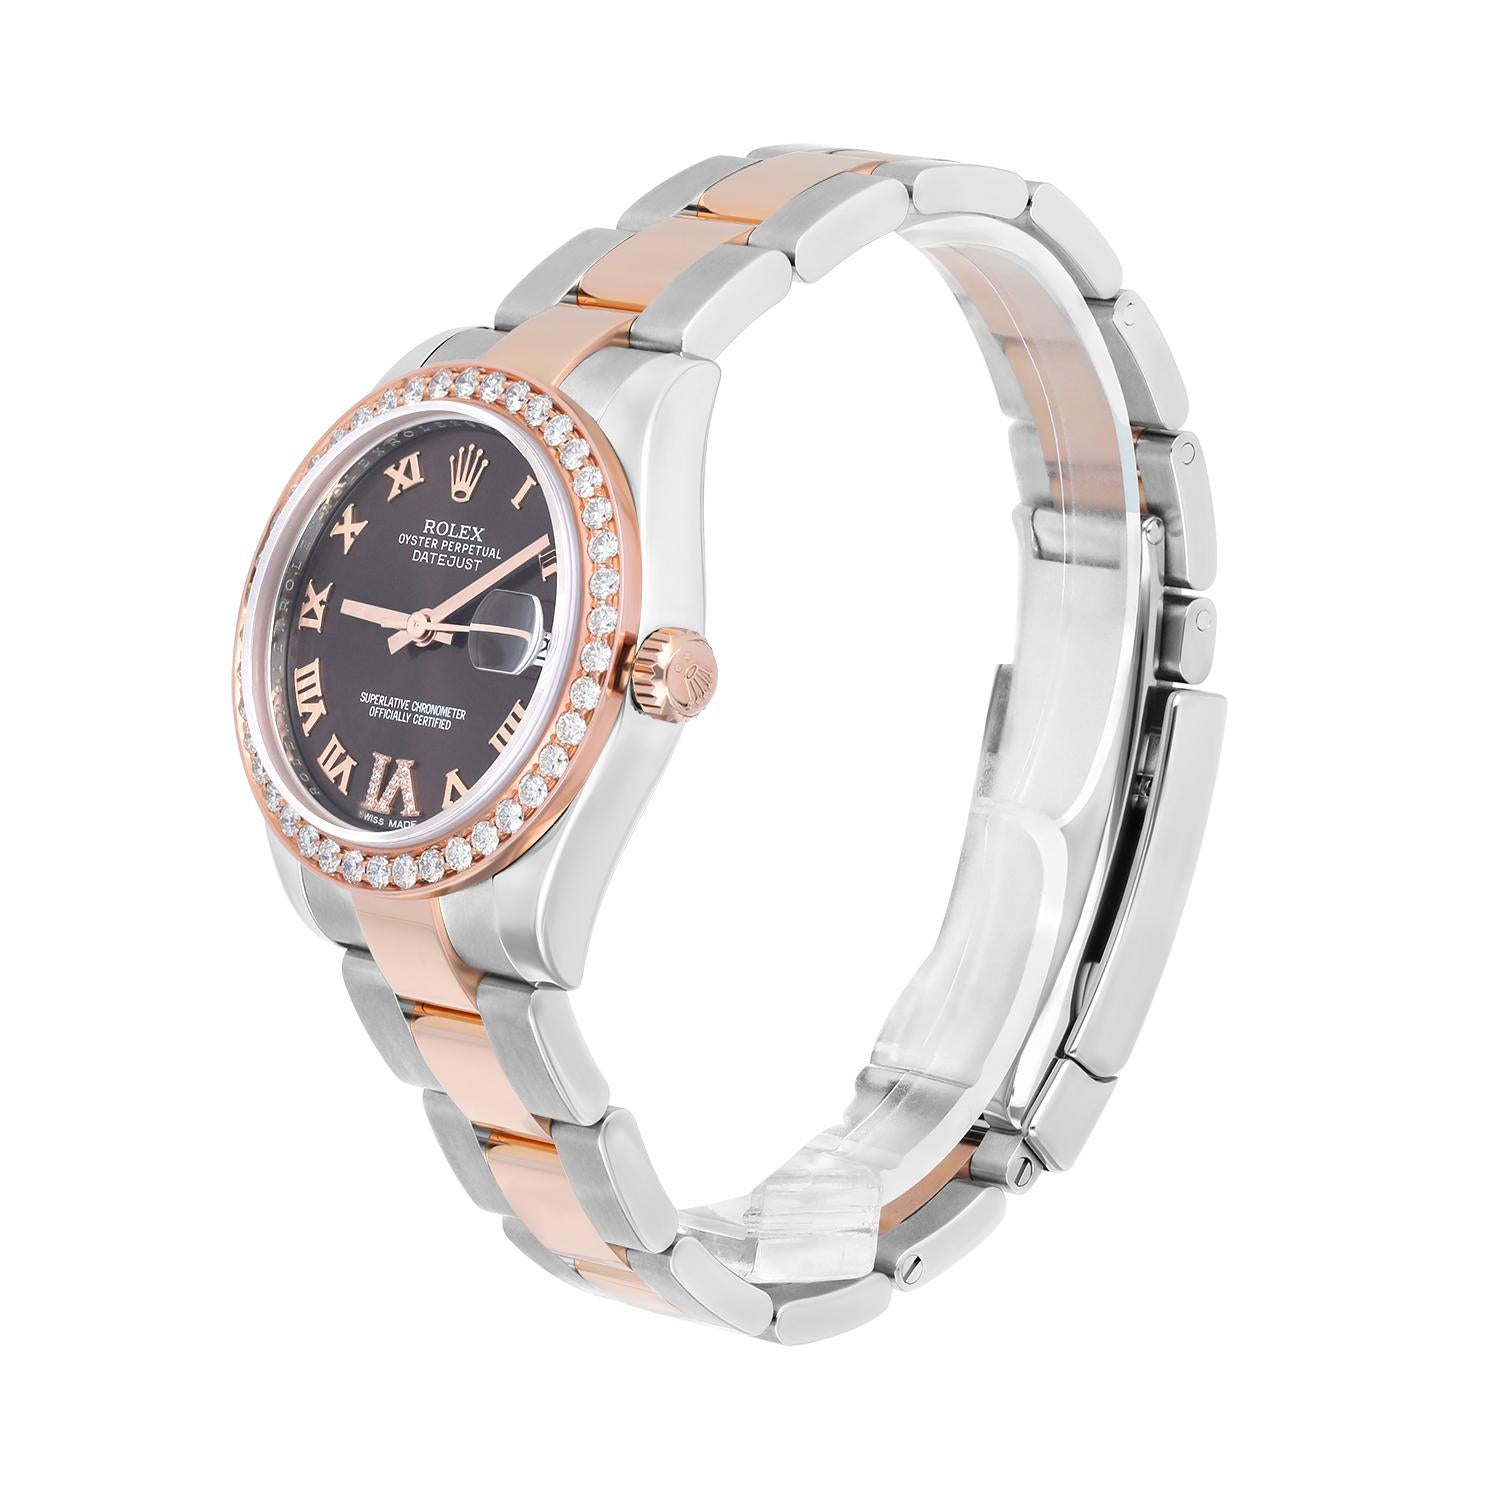 Rolex Datejust 31 Ladies 18k Rose Gold/Steel Watch Chocolate Roman Dial 178241 For Sale 1